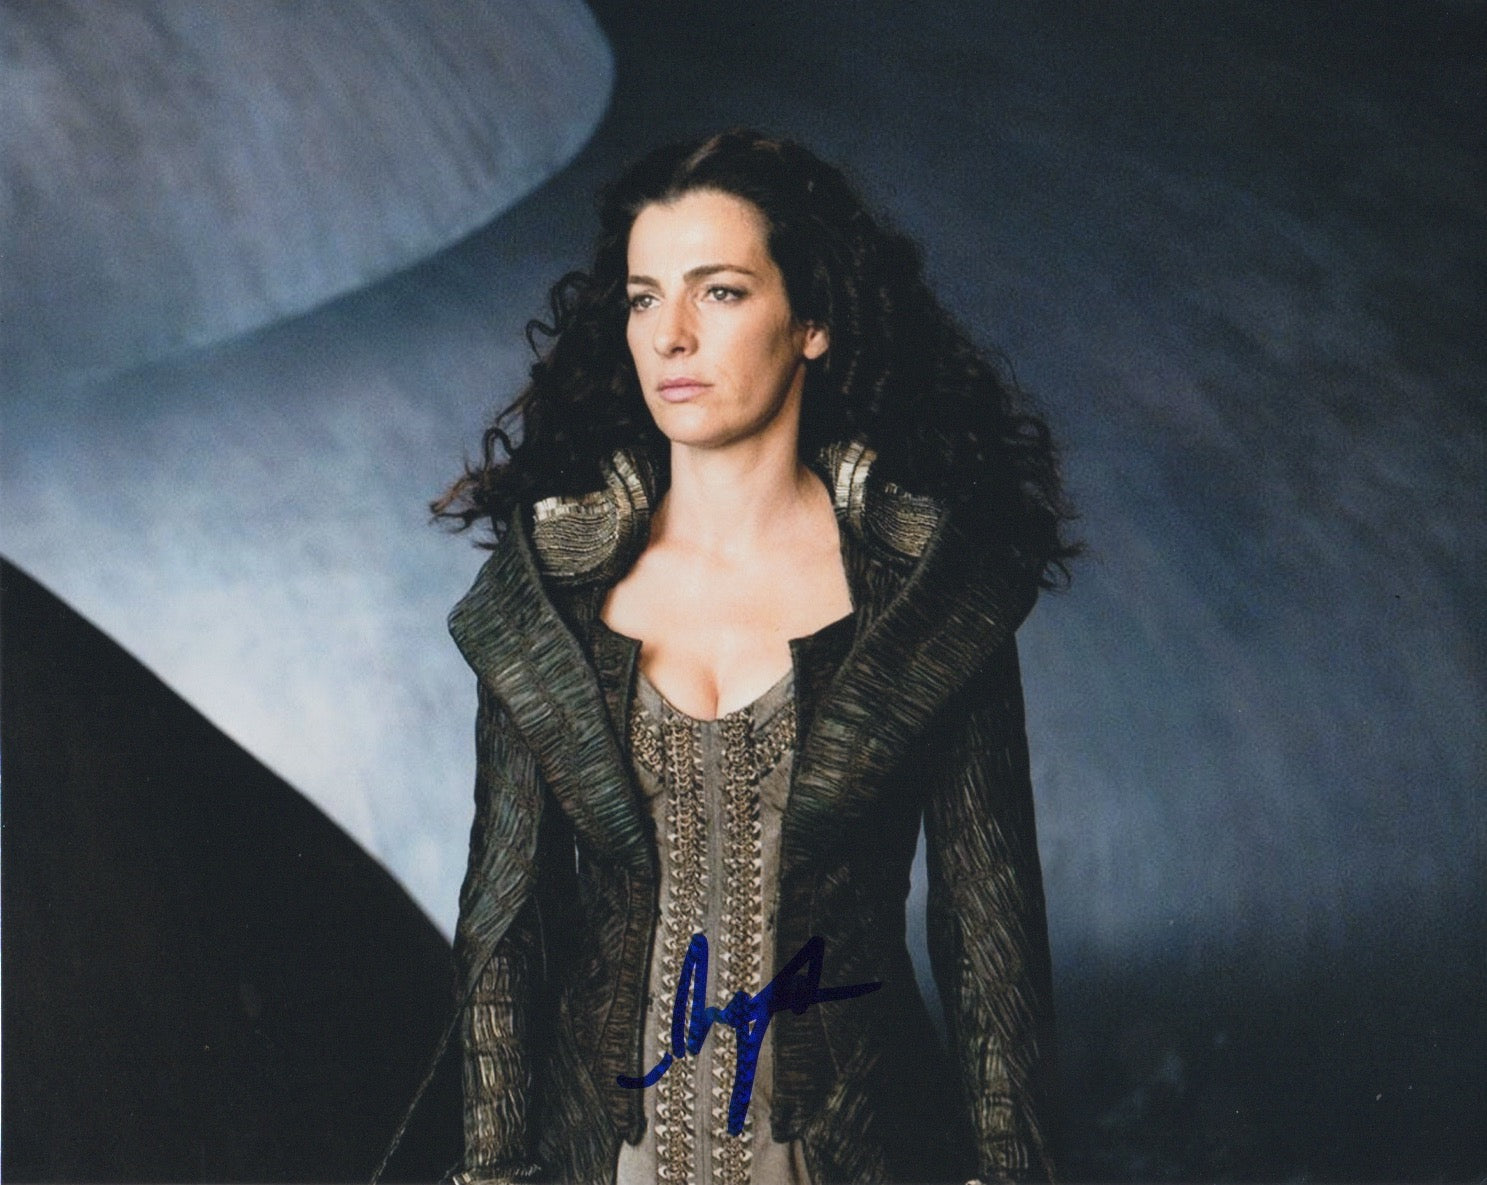 Ayelet Zurer Man of Steel Signed Autograph 8x10 Photo - Outlaw Hobbies Authentic Autographs